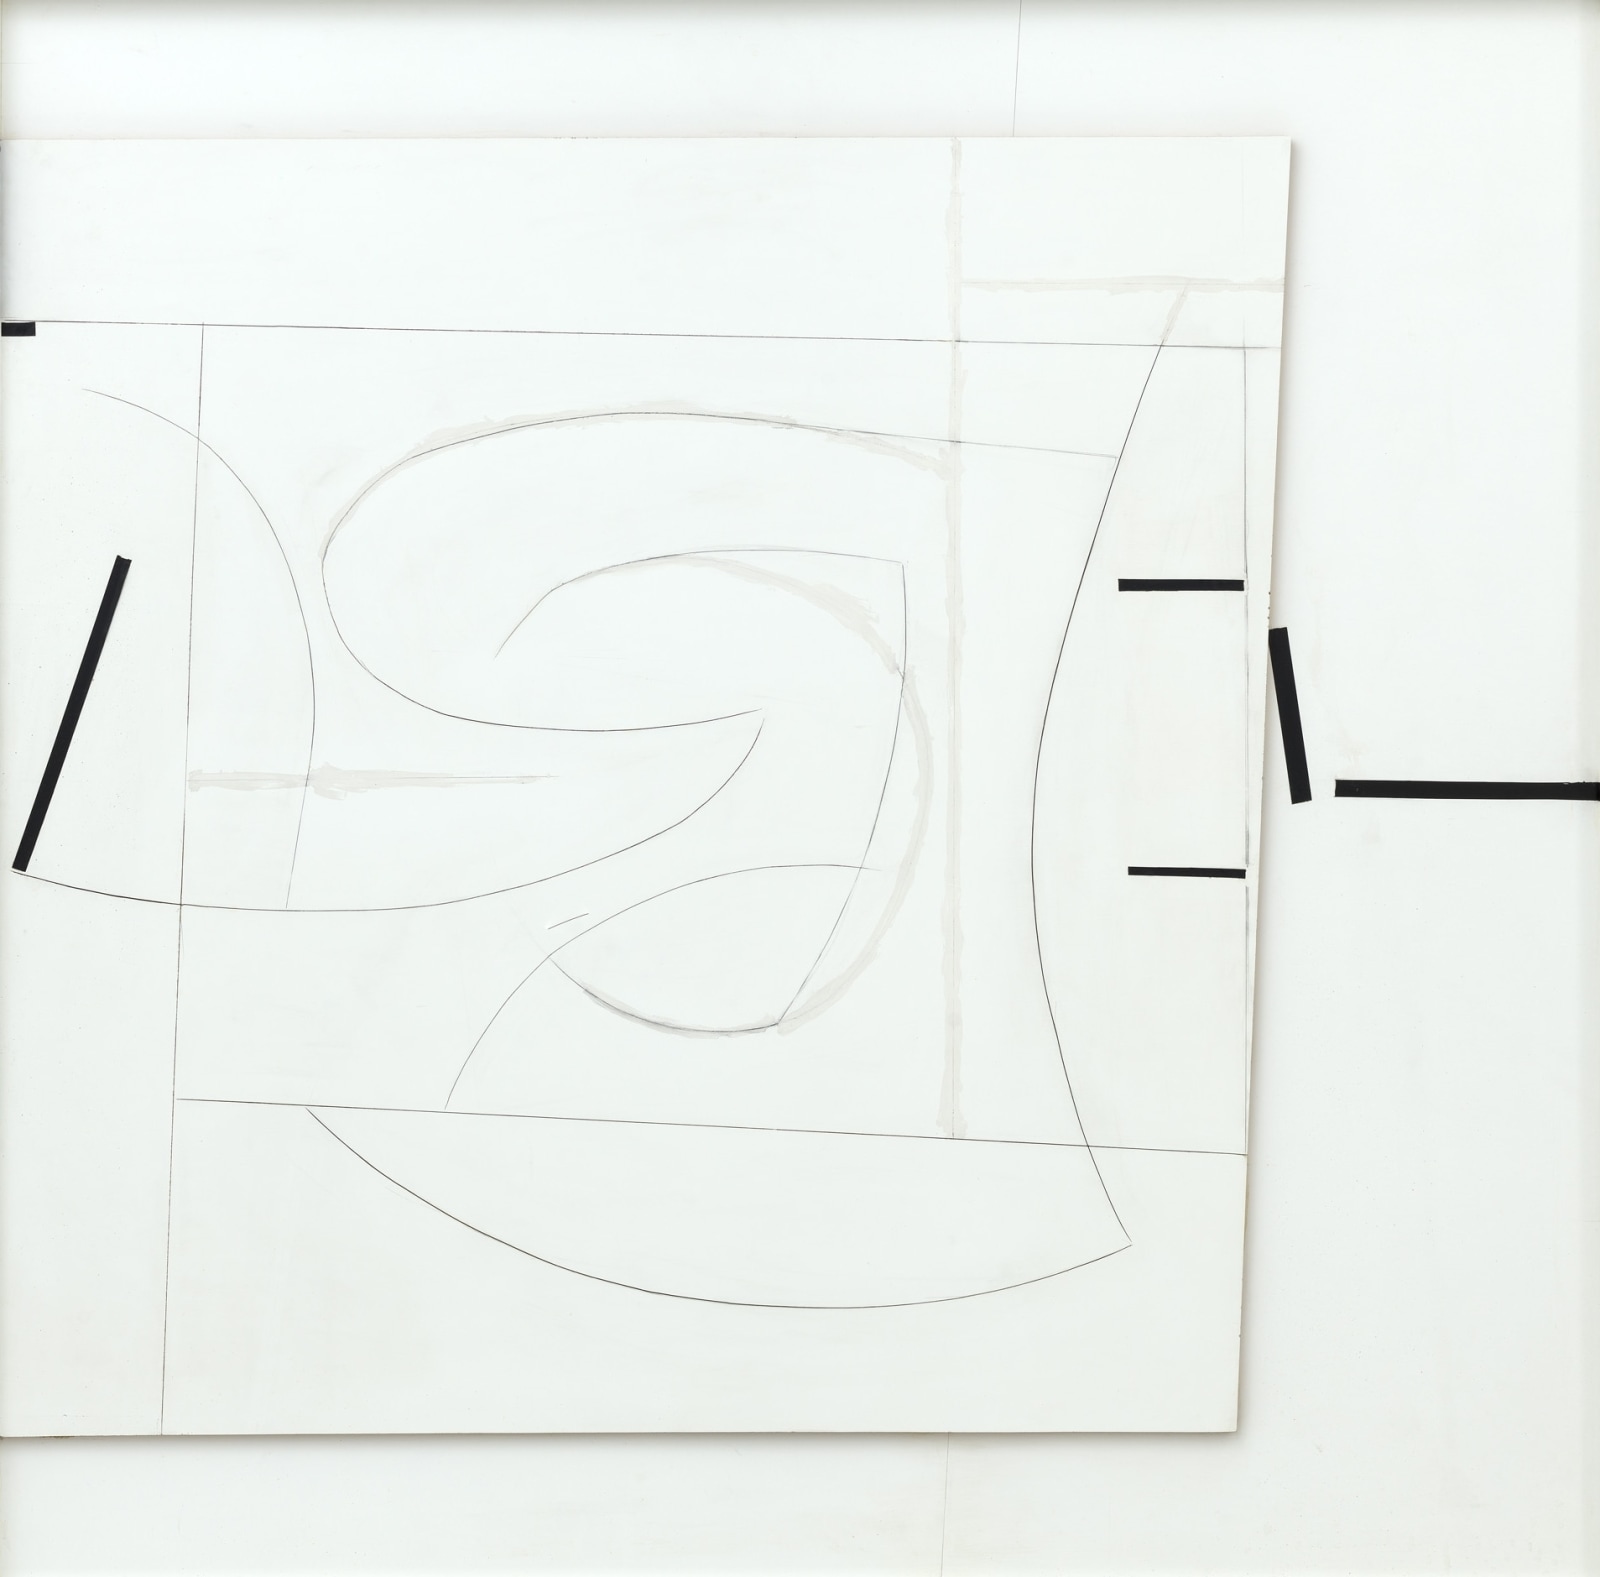 Victor Pasmore Gallery to open this fall